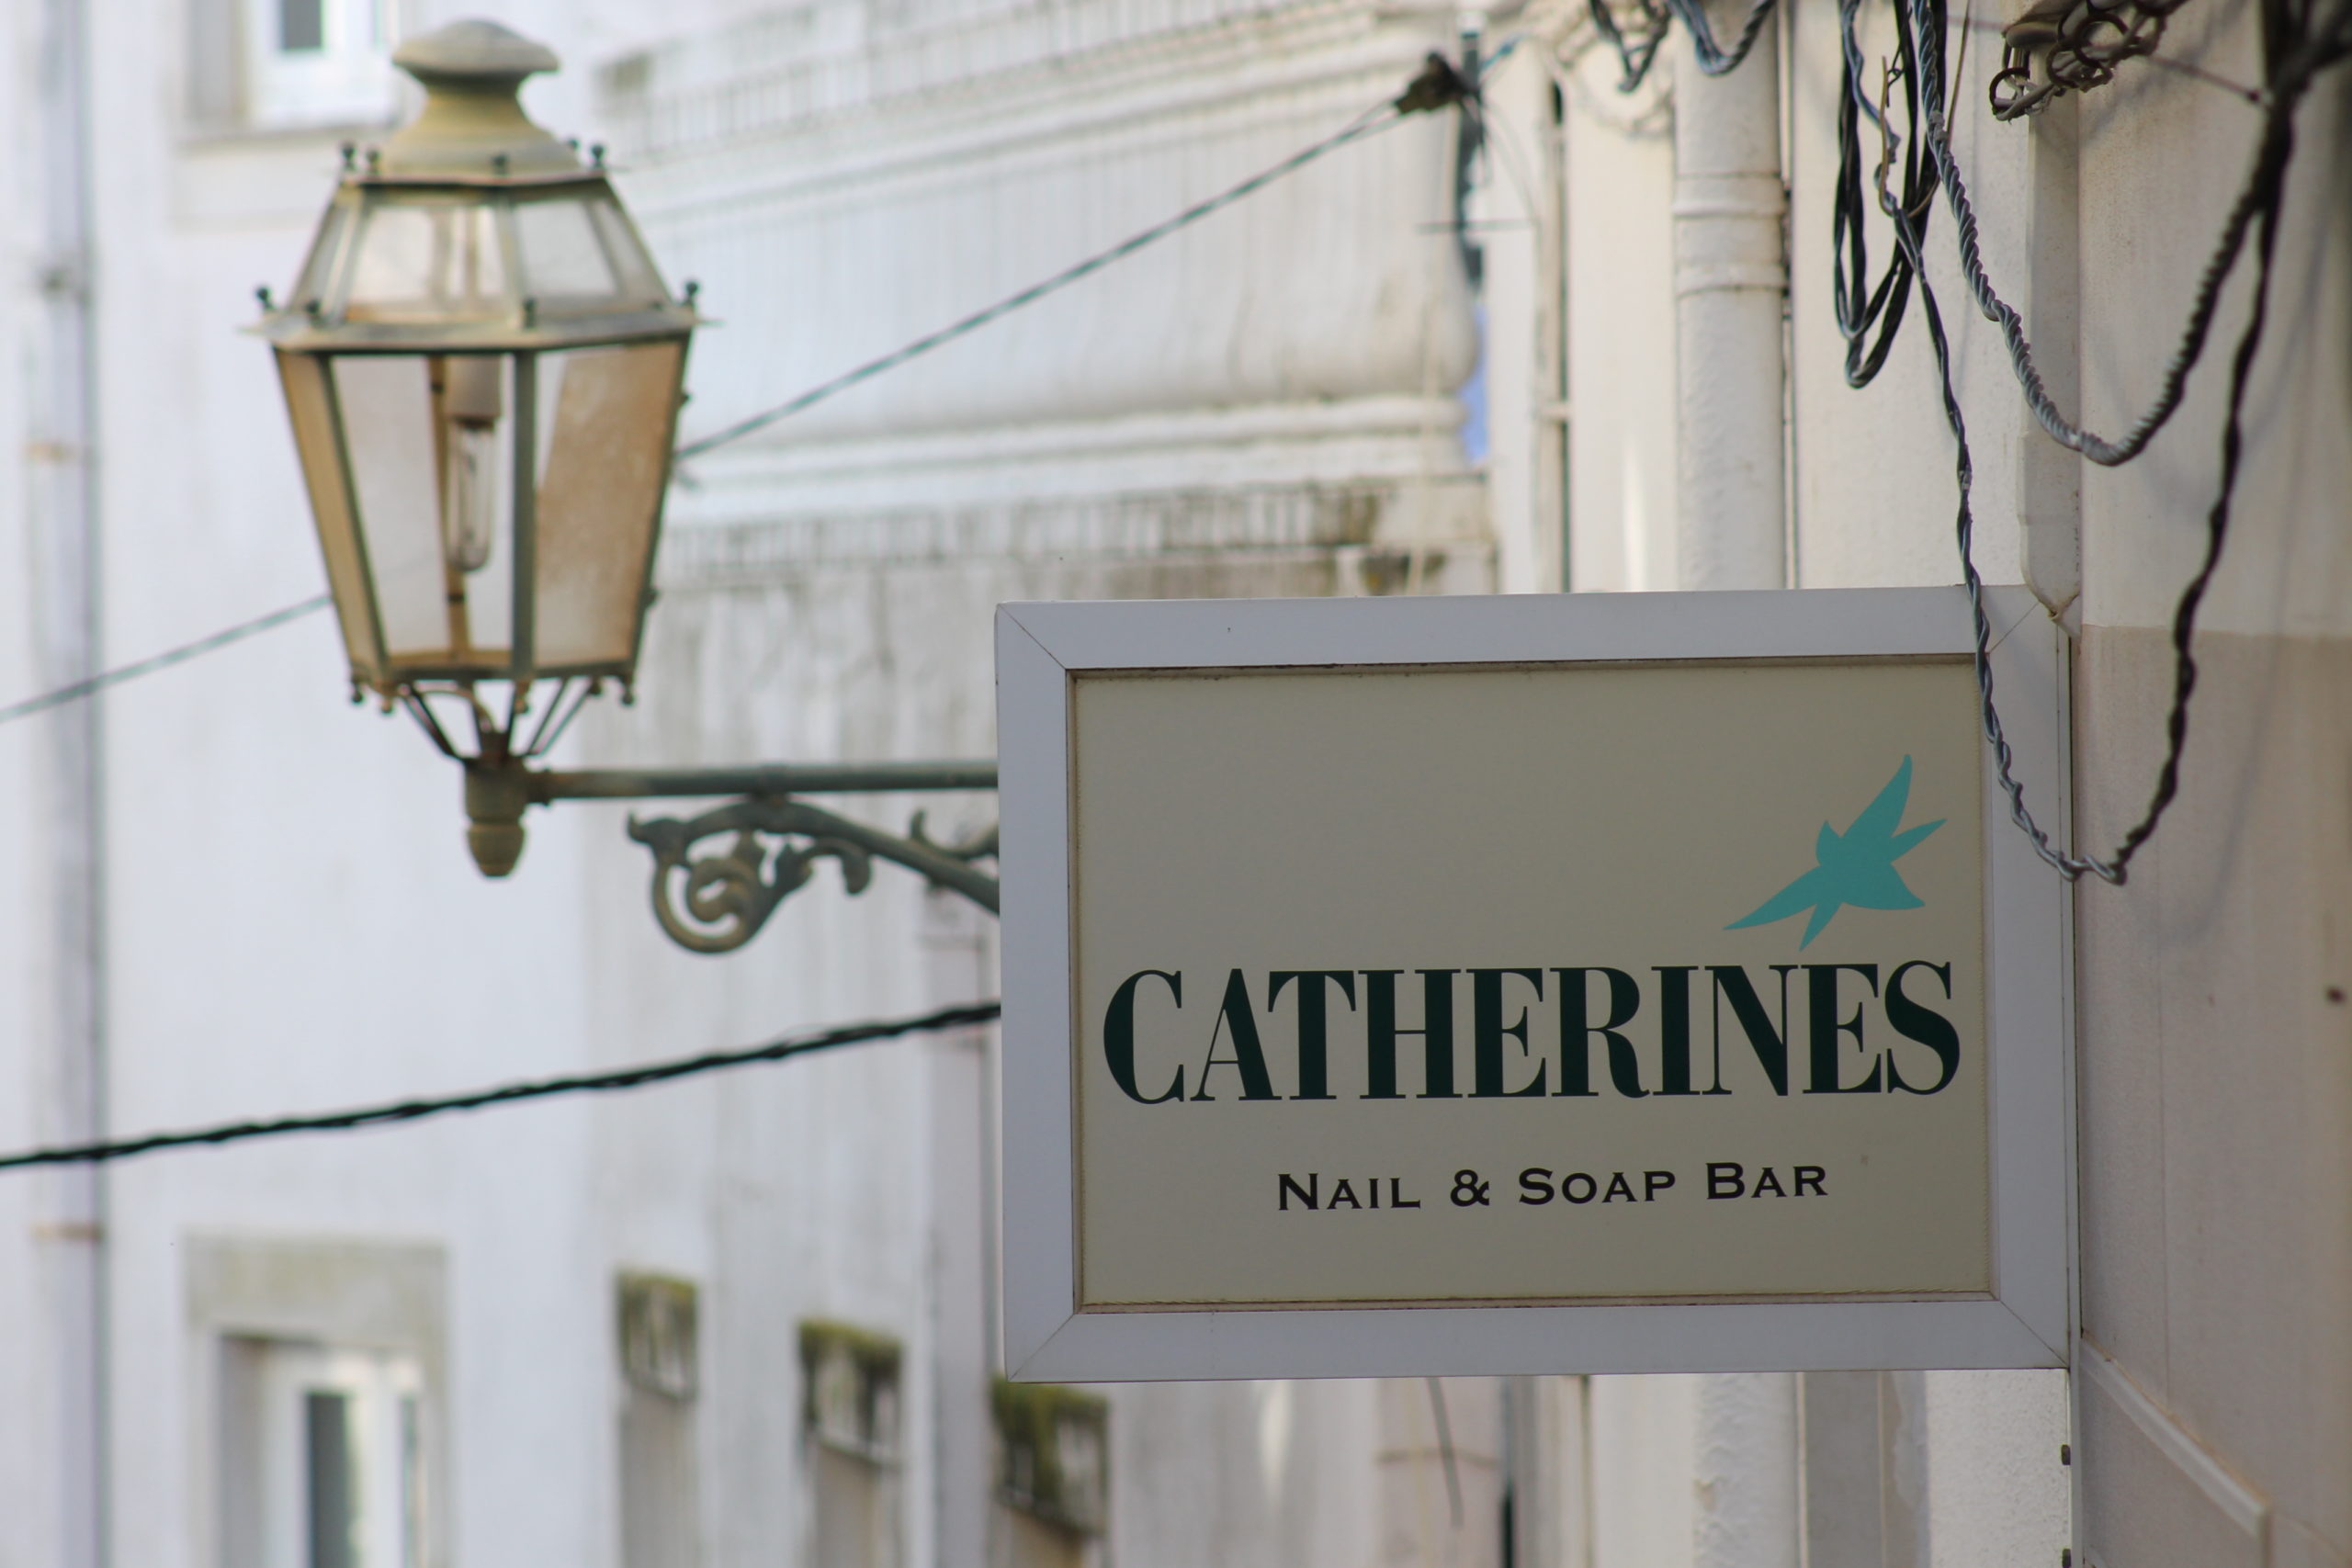 Catherine’s Nail and Soap Bar